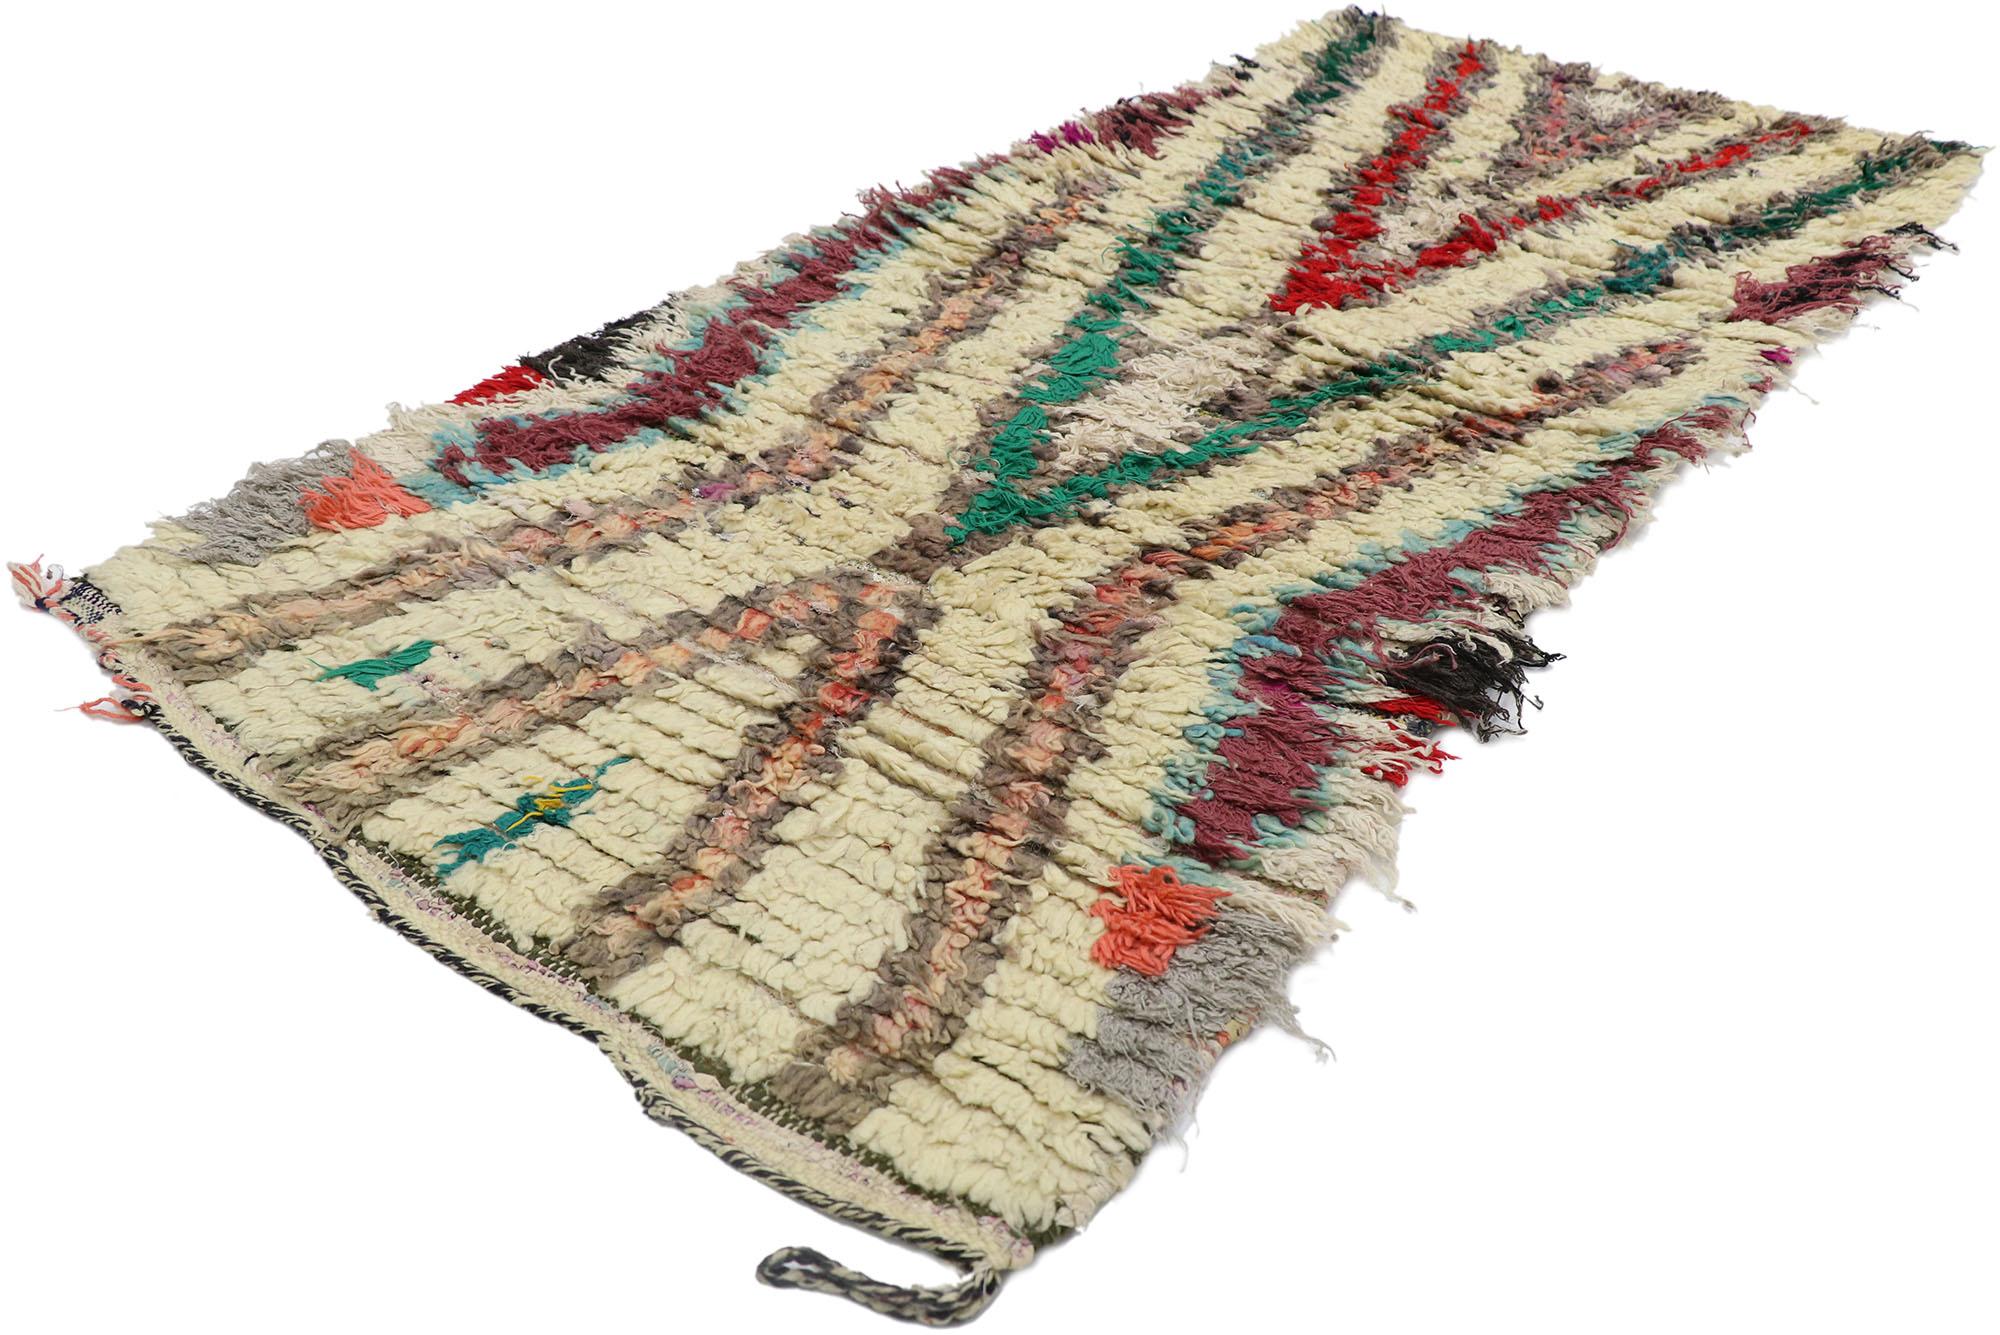 21534 Vintage Berber Moroccan Boucherouite Rug with Bohemian Tribal Style 02'04 x 05'03. Showcasing a bold expressive design, incredible detail and texture, this hand knotted cotton and wool vintage Berber Moroccan Boucherouite rug is a captivating